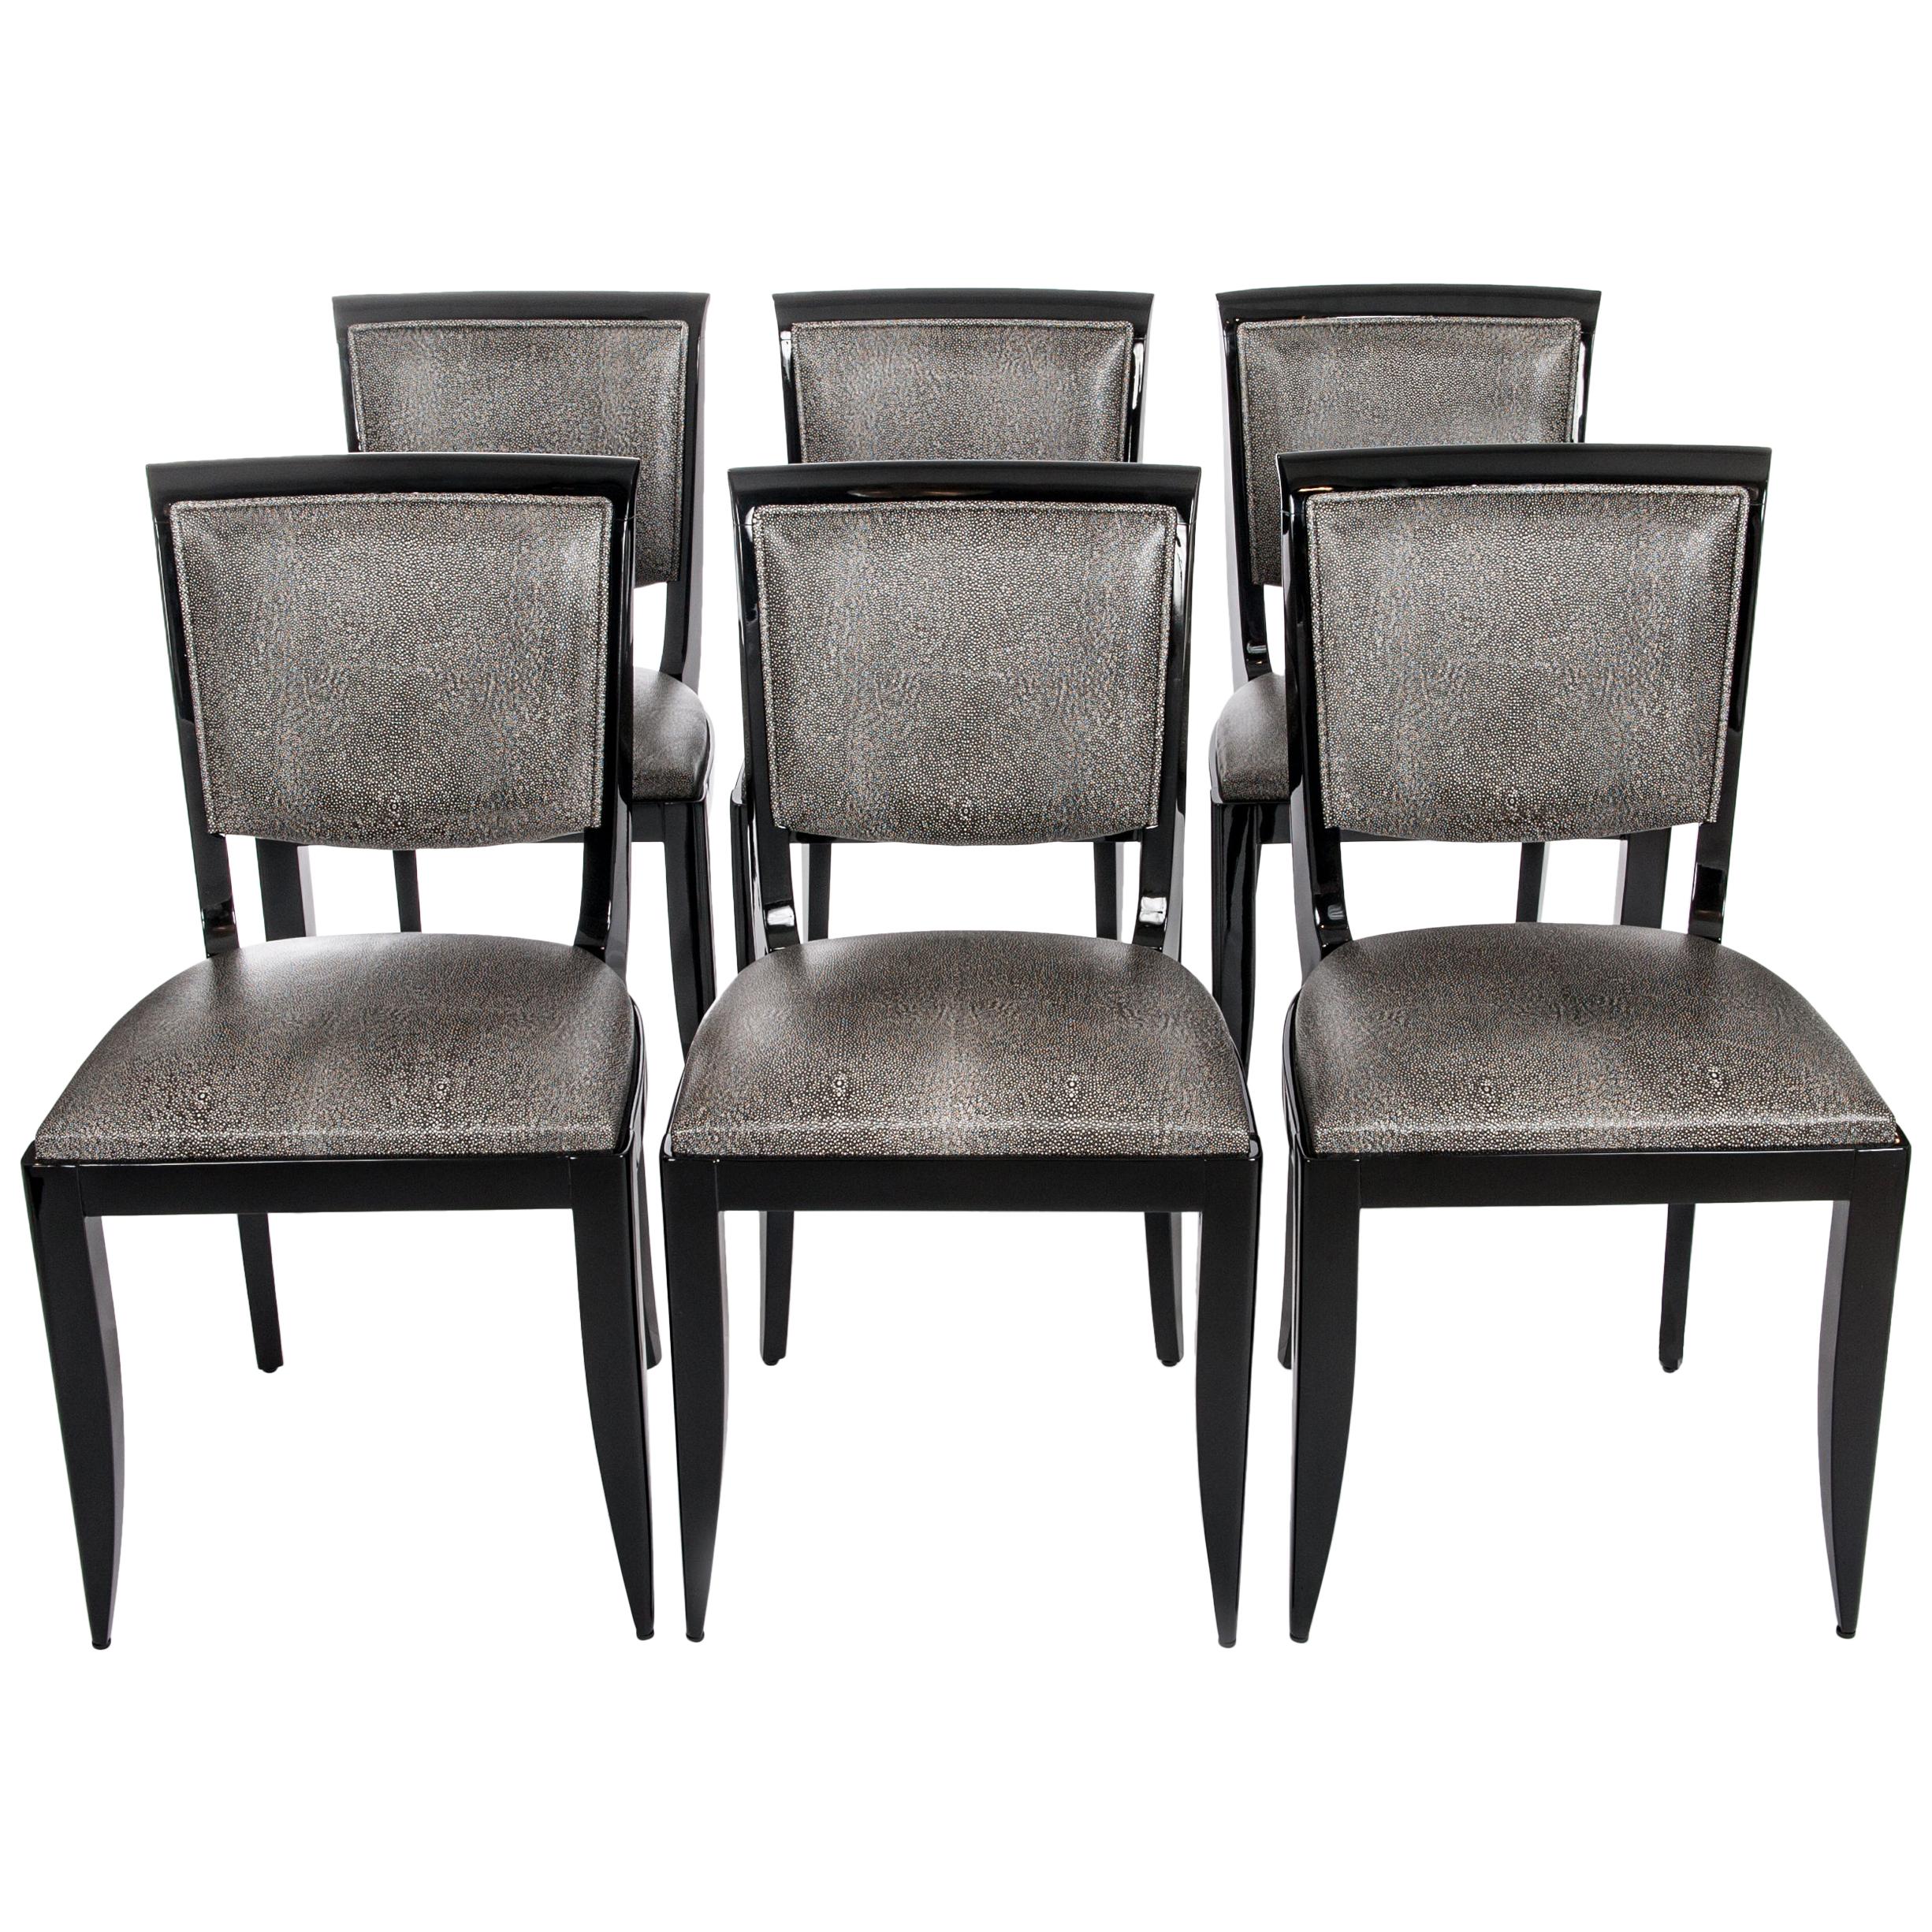 Dining Room Chairs Black, Black And White Leather Dining Room Chairs With Arms